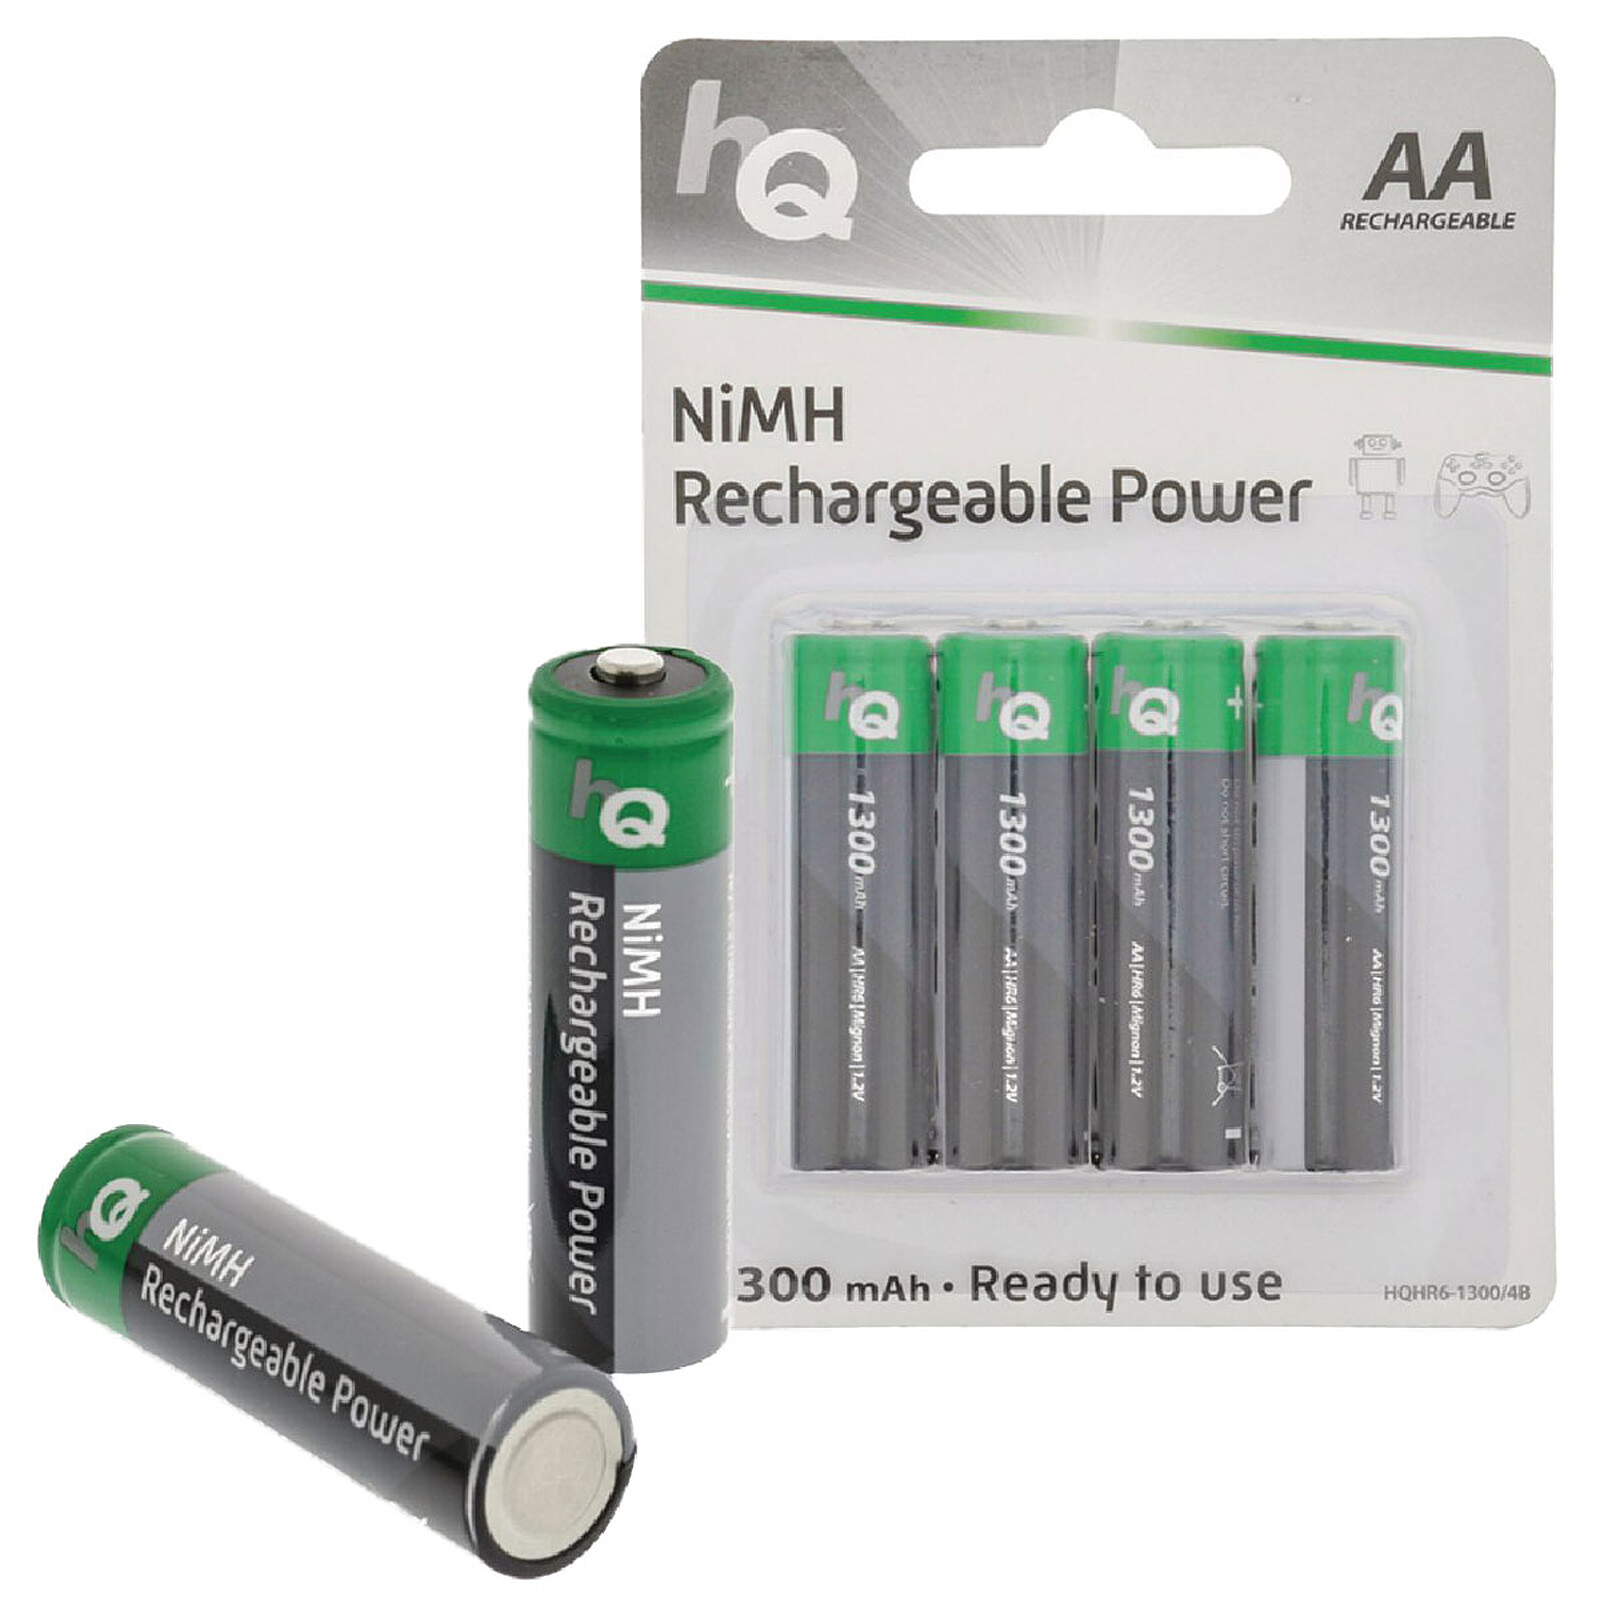 LDLC+ NiMH AAA - 4 piles rechargeables AAA (HR03) 800 mAh - Pile